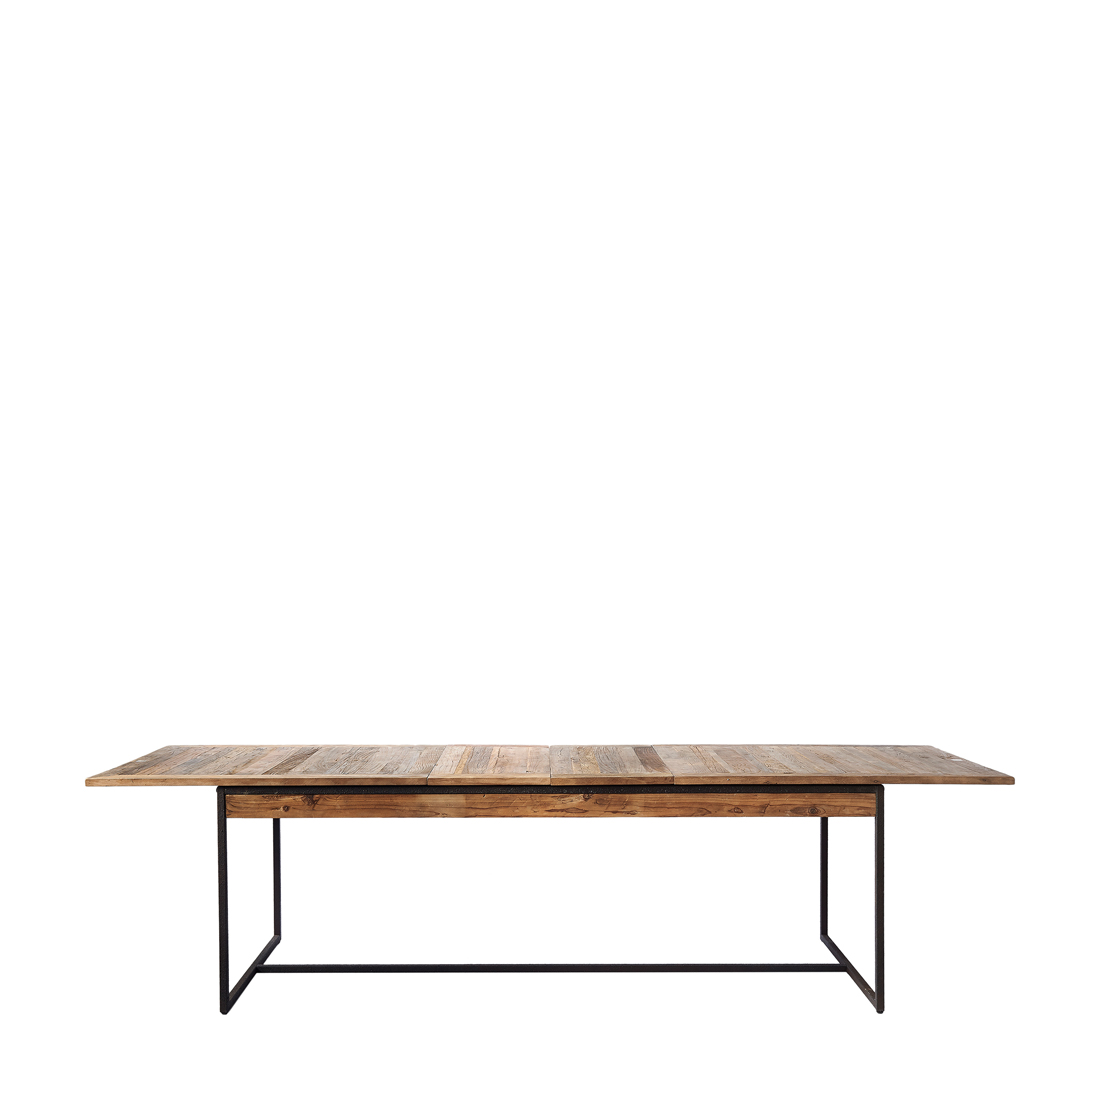 Shelter Island Dining Table Ext